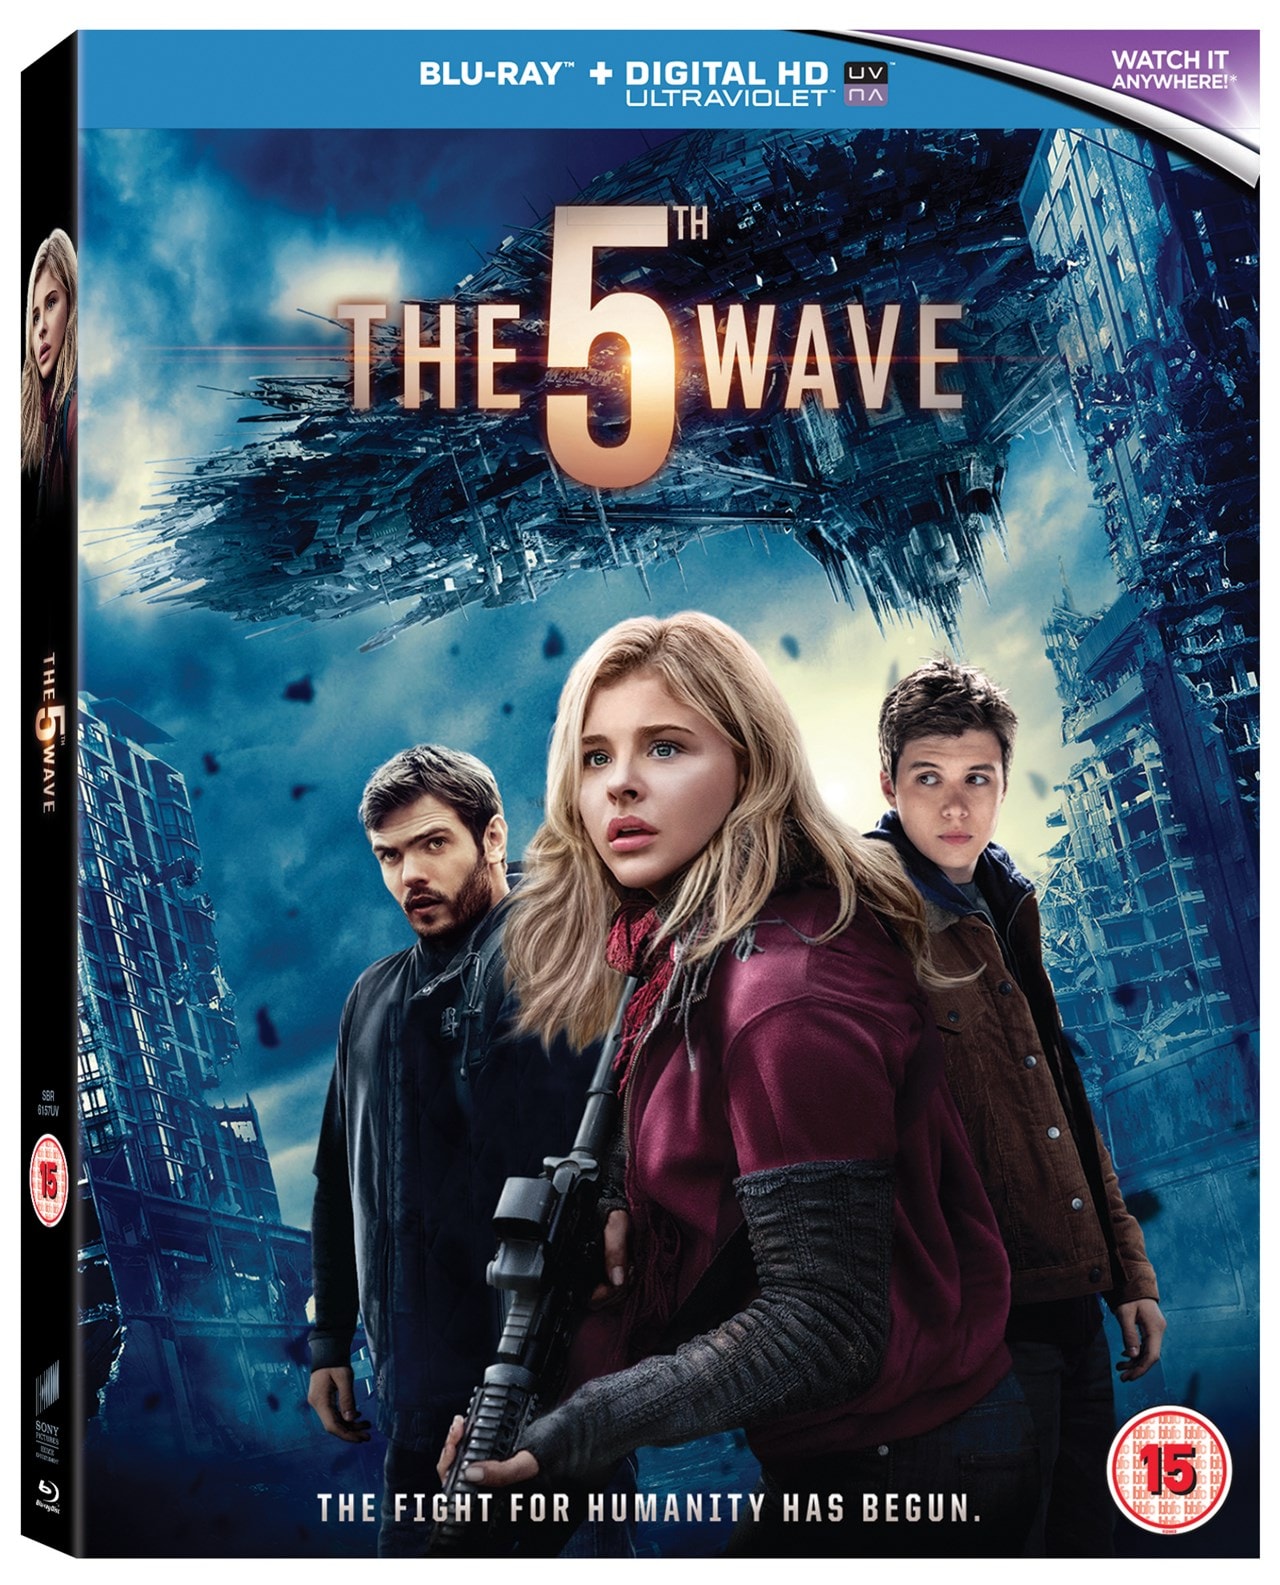 the 5th wave full movie free